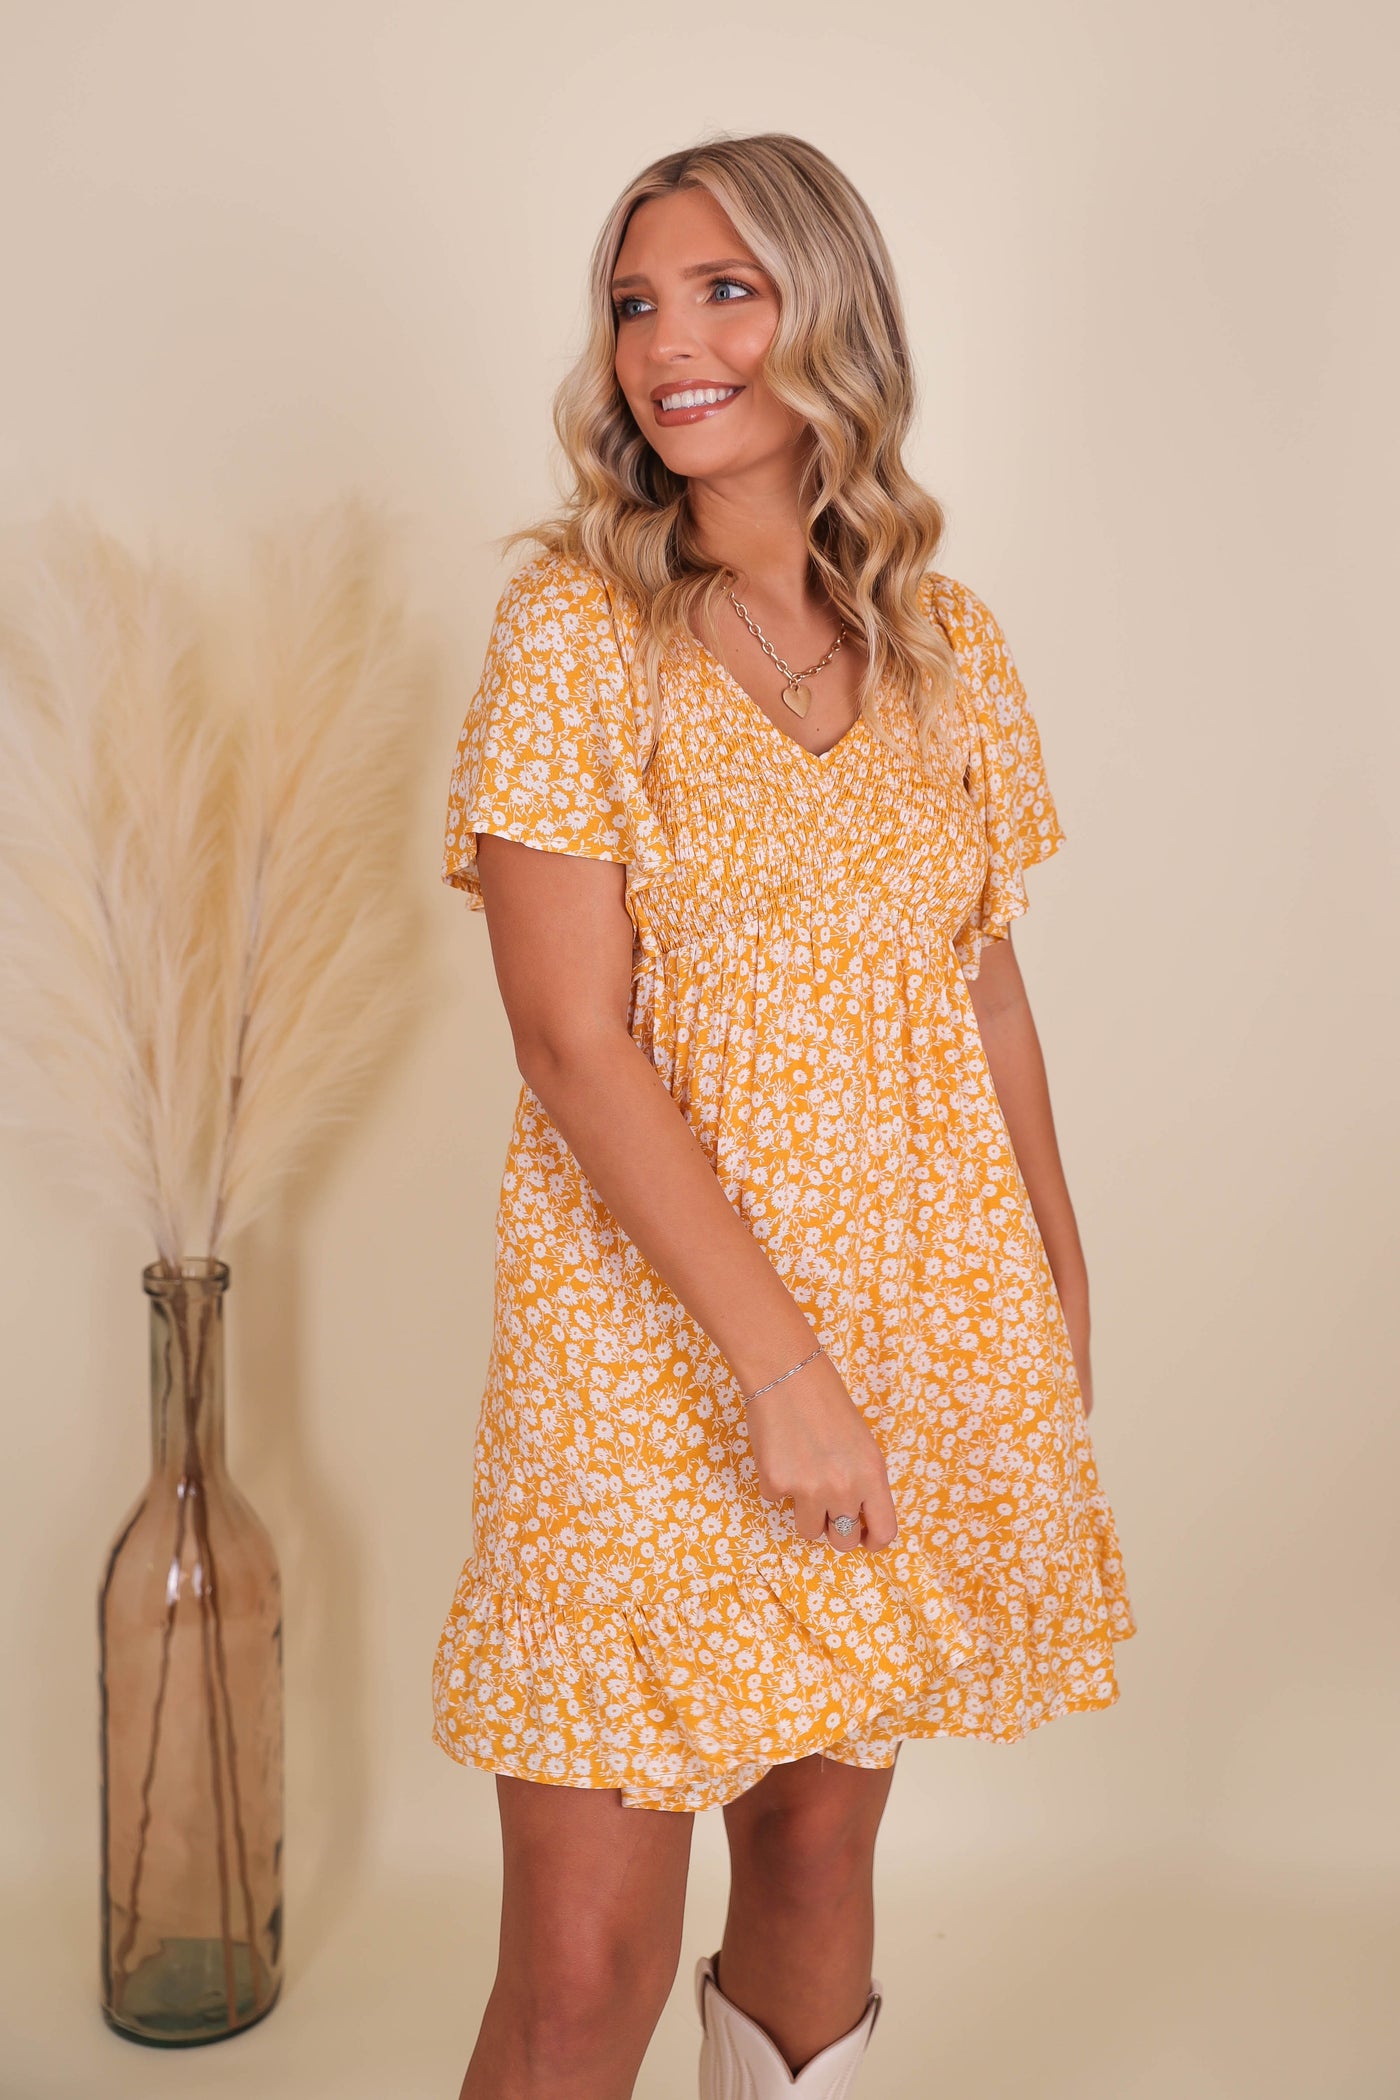 Women's Pretty Yellow Dress- Dress With Smocked Chest- Darling Floral Dress